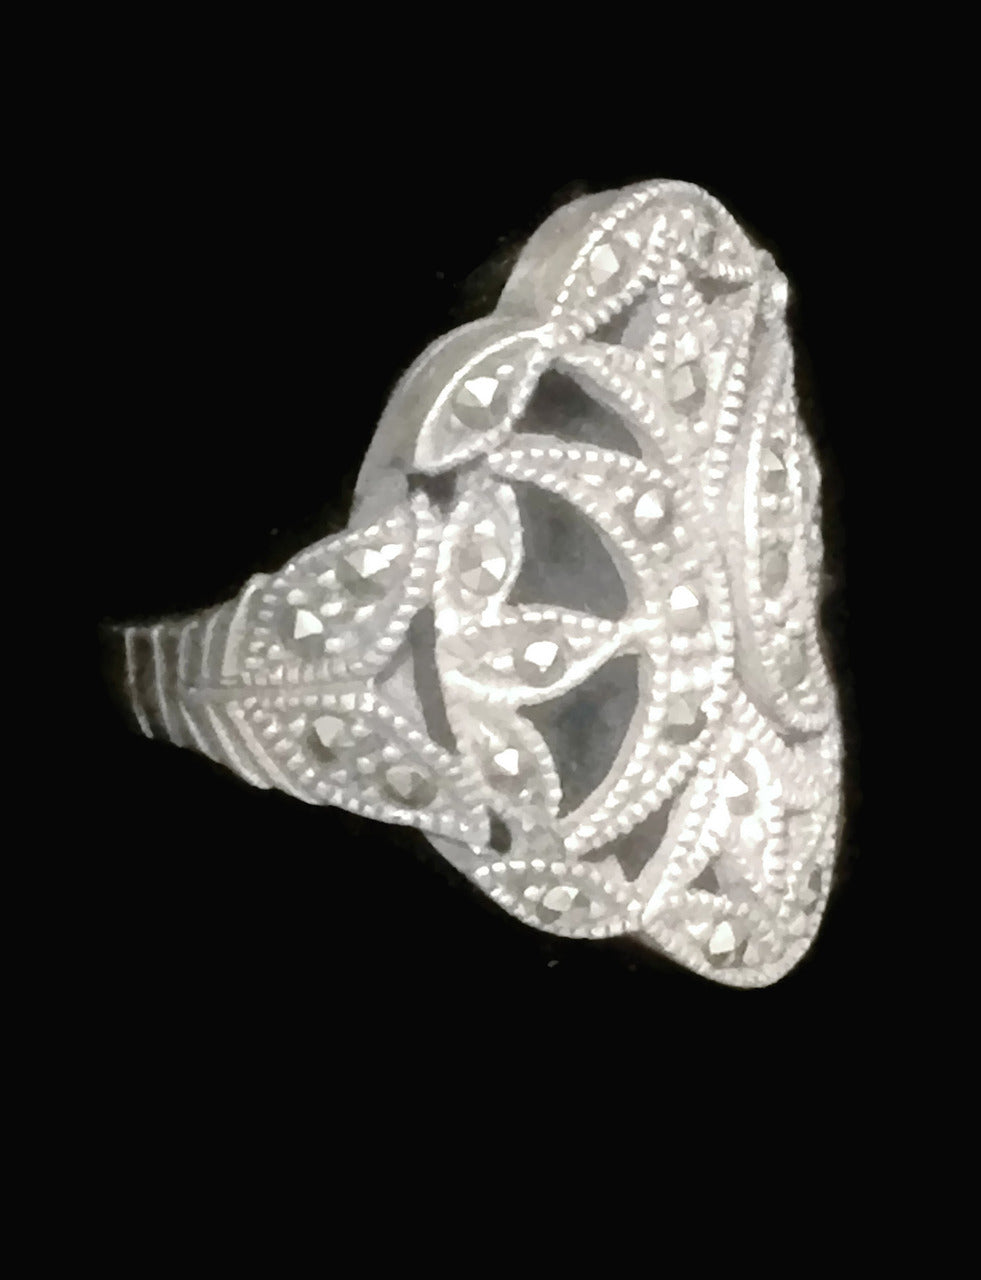 Marcasite Ring Art Deco Moon Sterling Silver Size 5.5